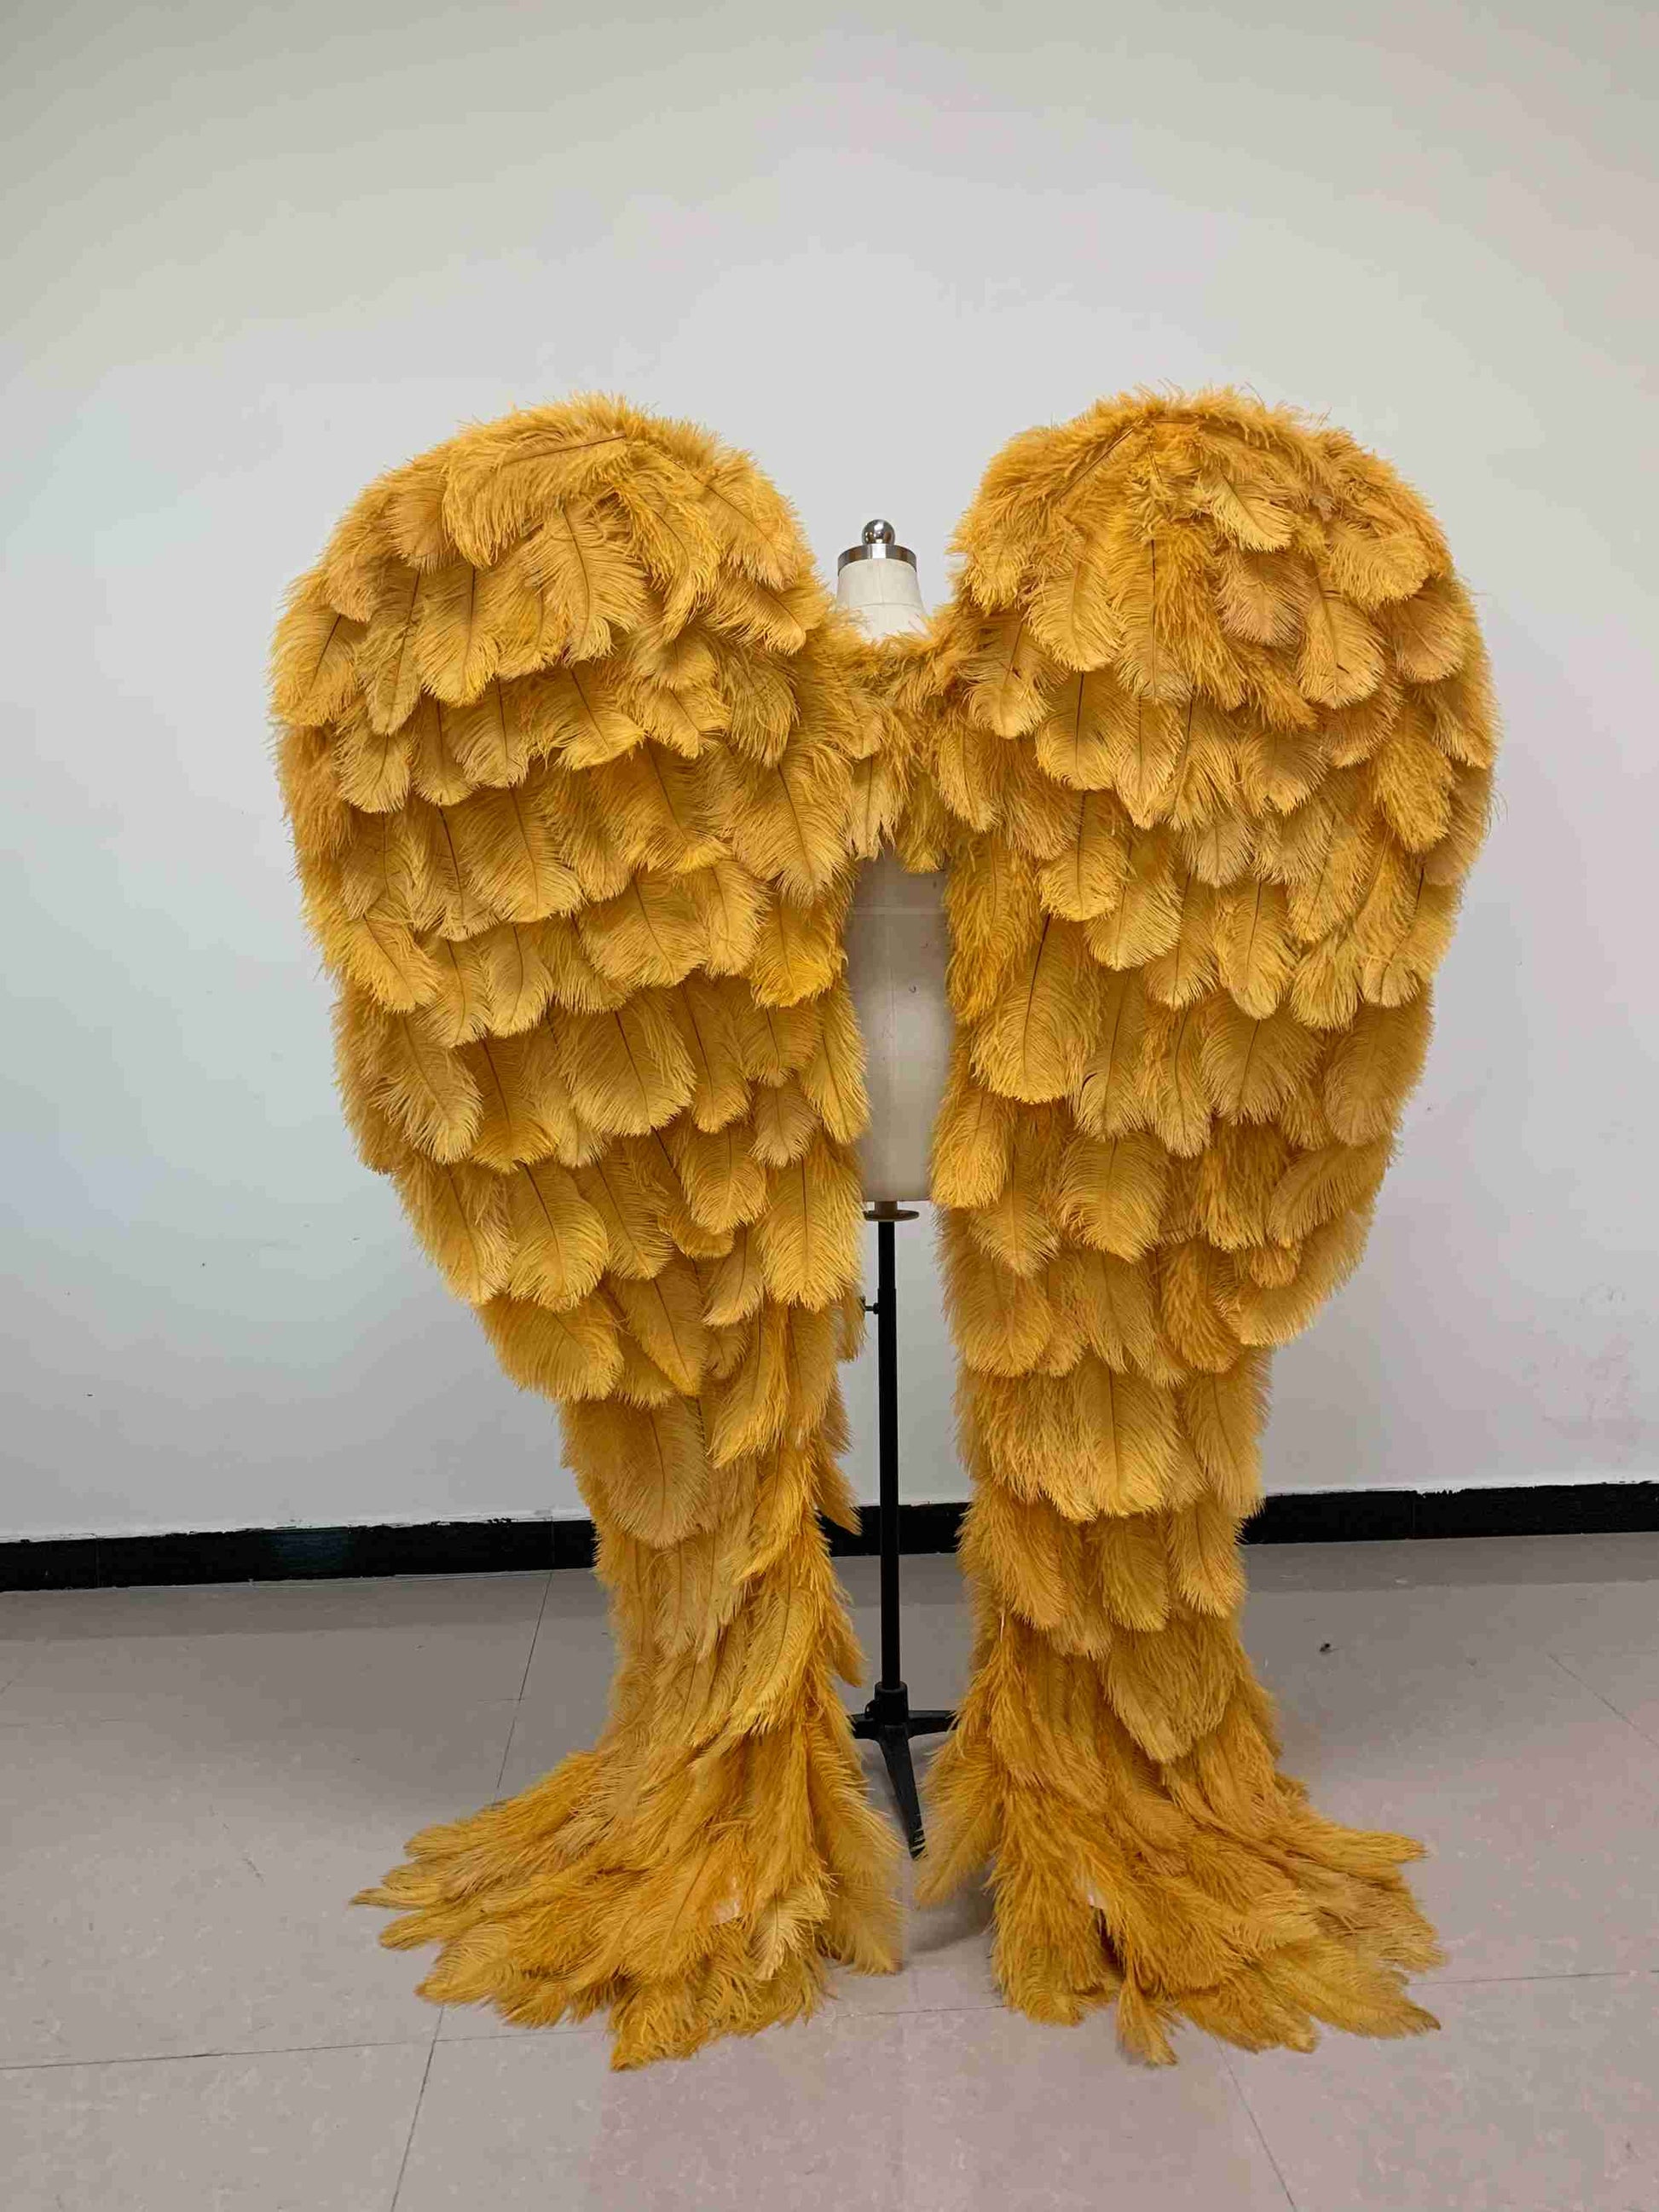 Our luxury golden angel wings from the back. Made from ostrich feathers. Wings for angel costume. Suitable for photoshoots especially for boudoirs.